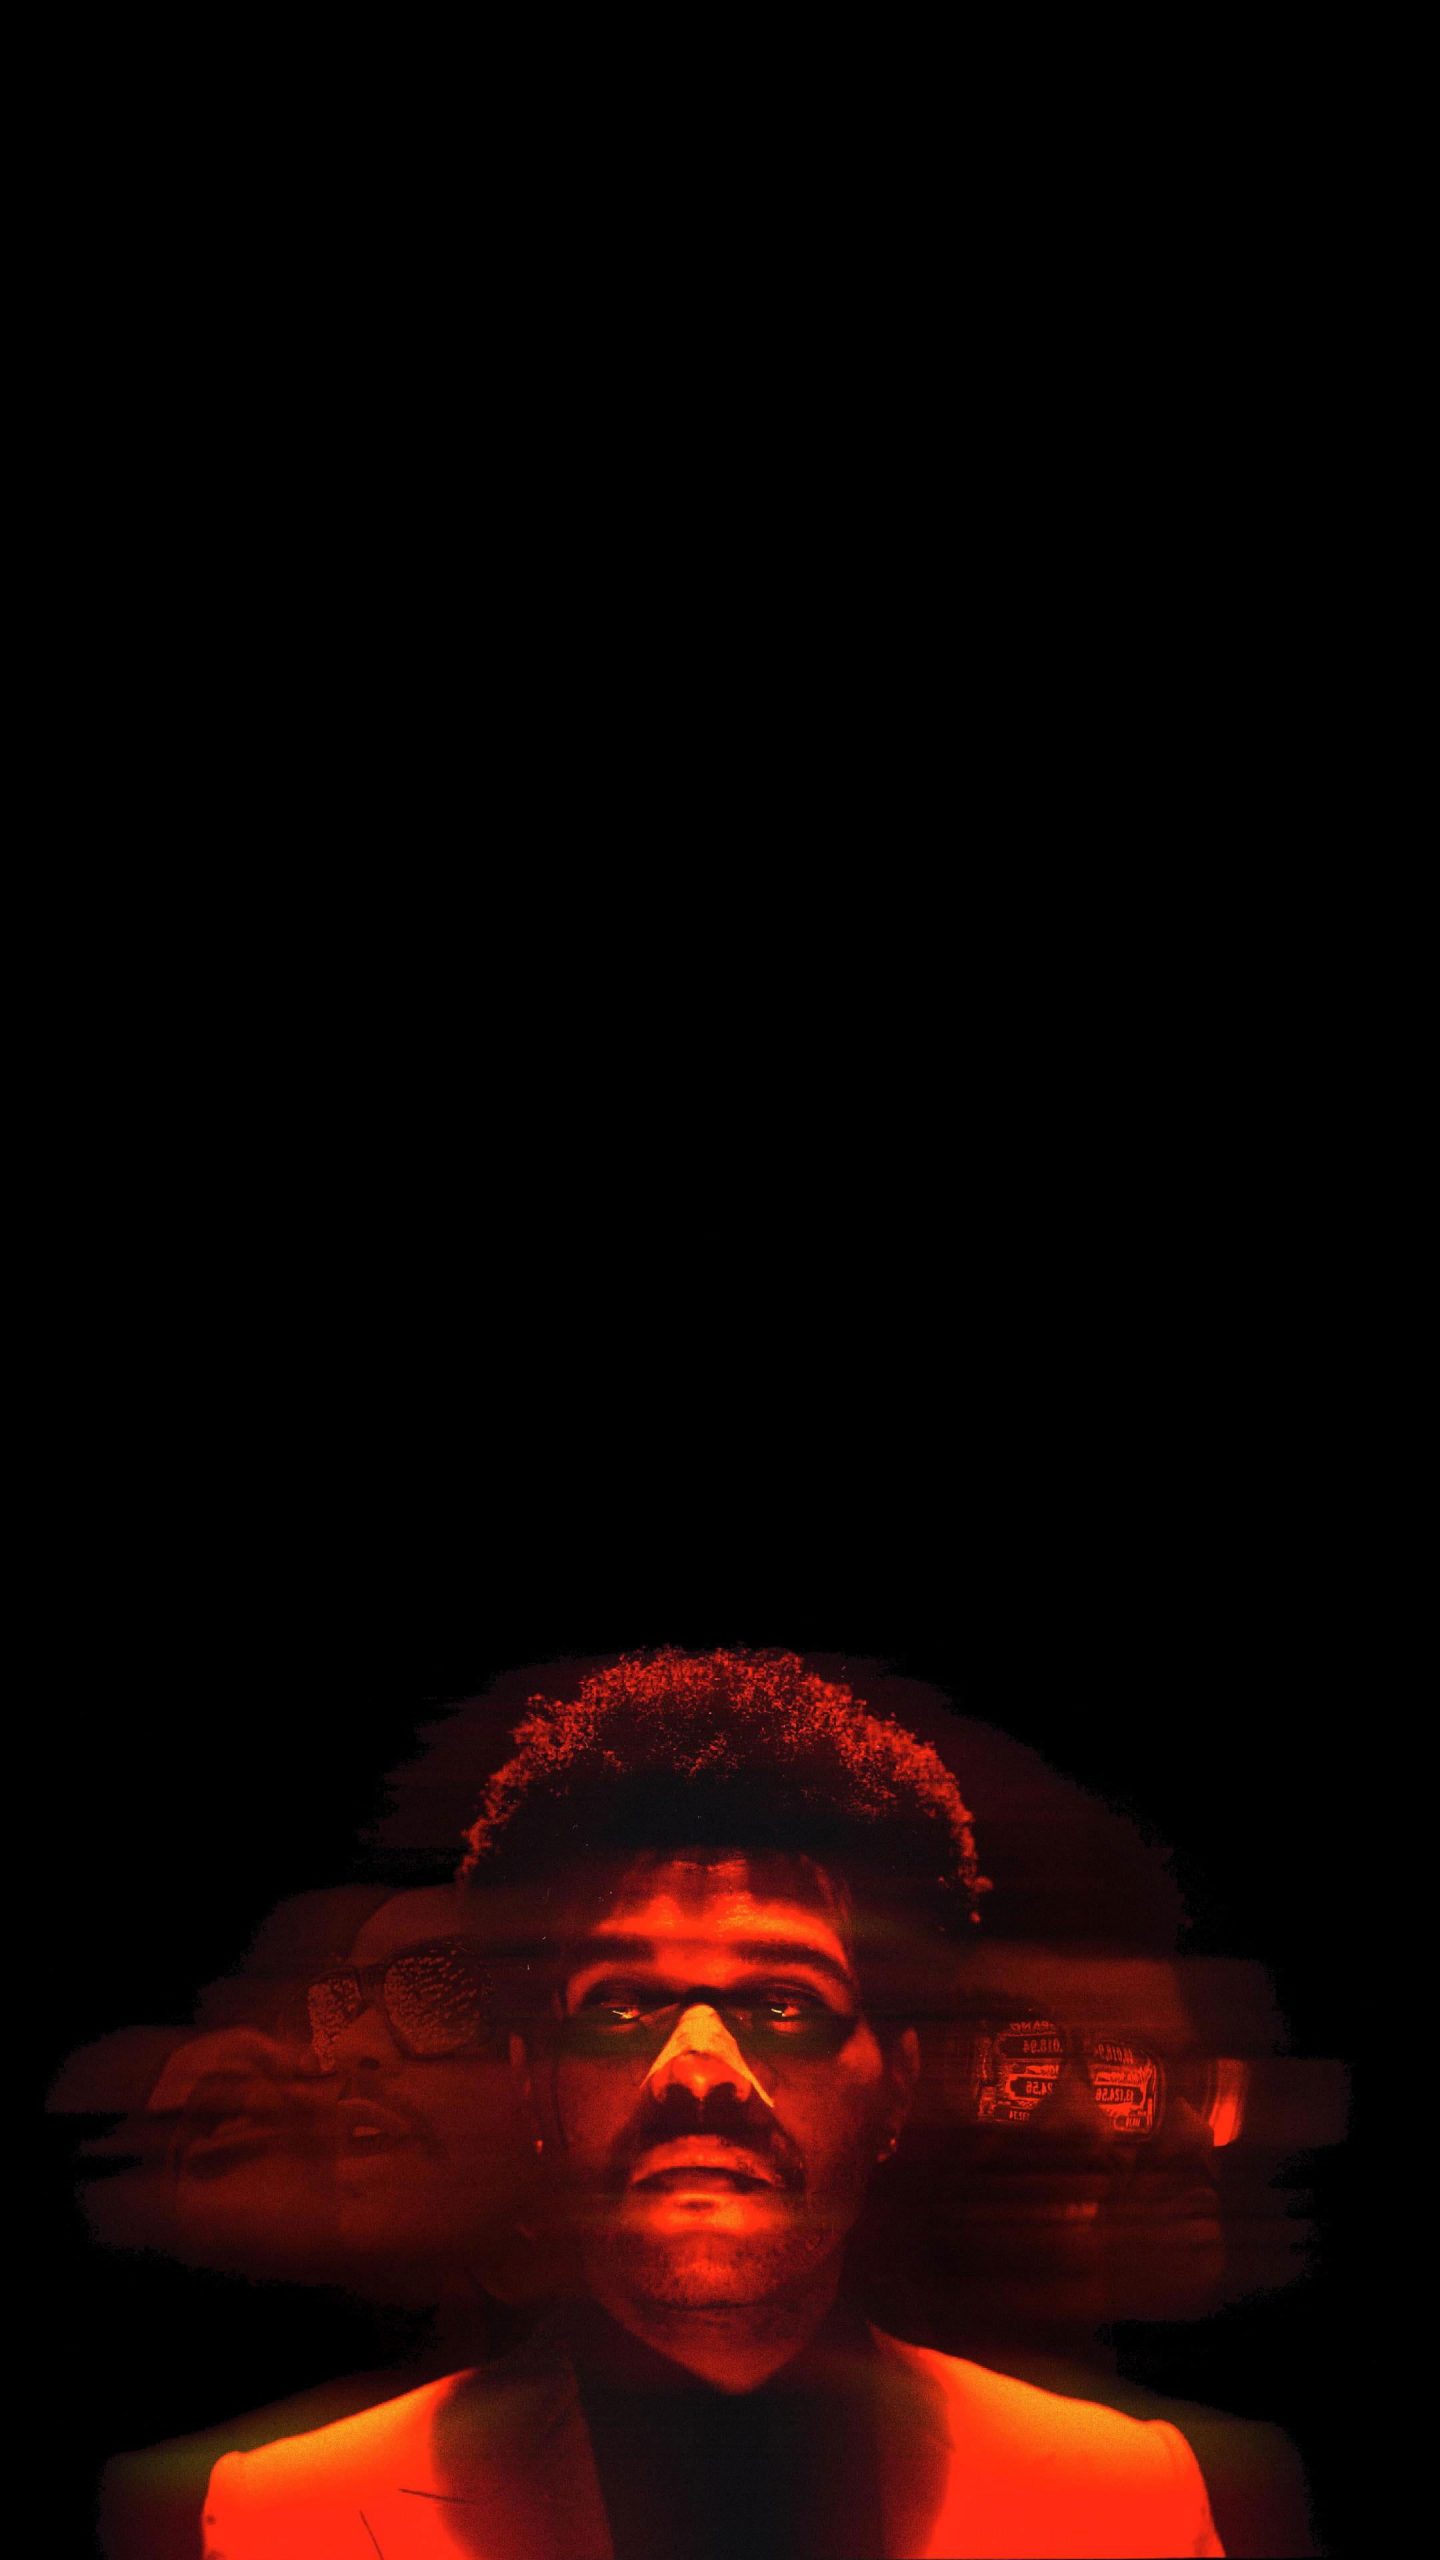 Amoled wallpaper, The Weeknd, vertical, iPhone